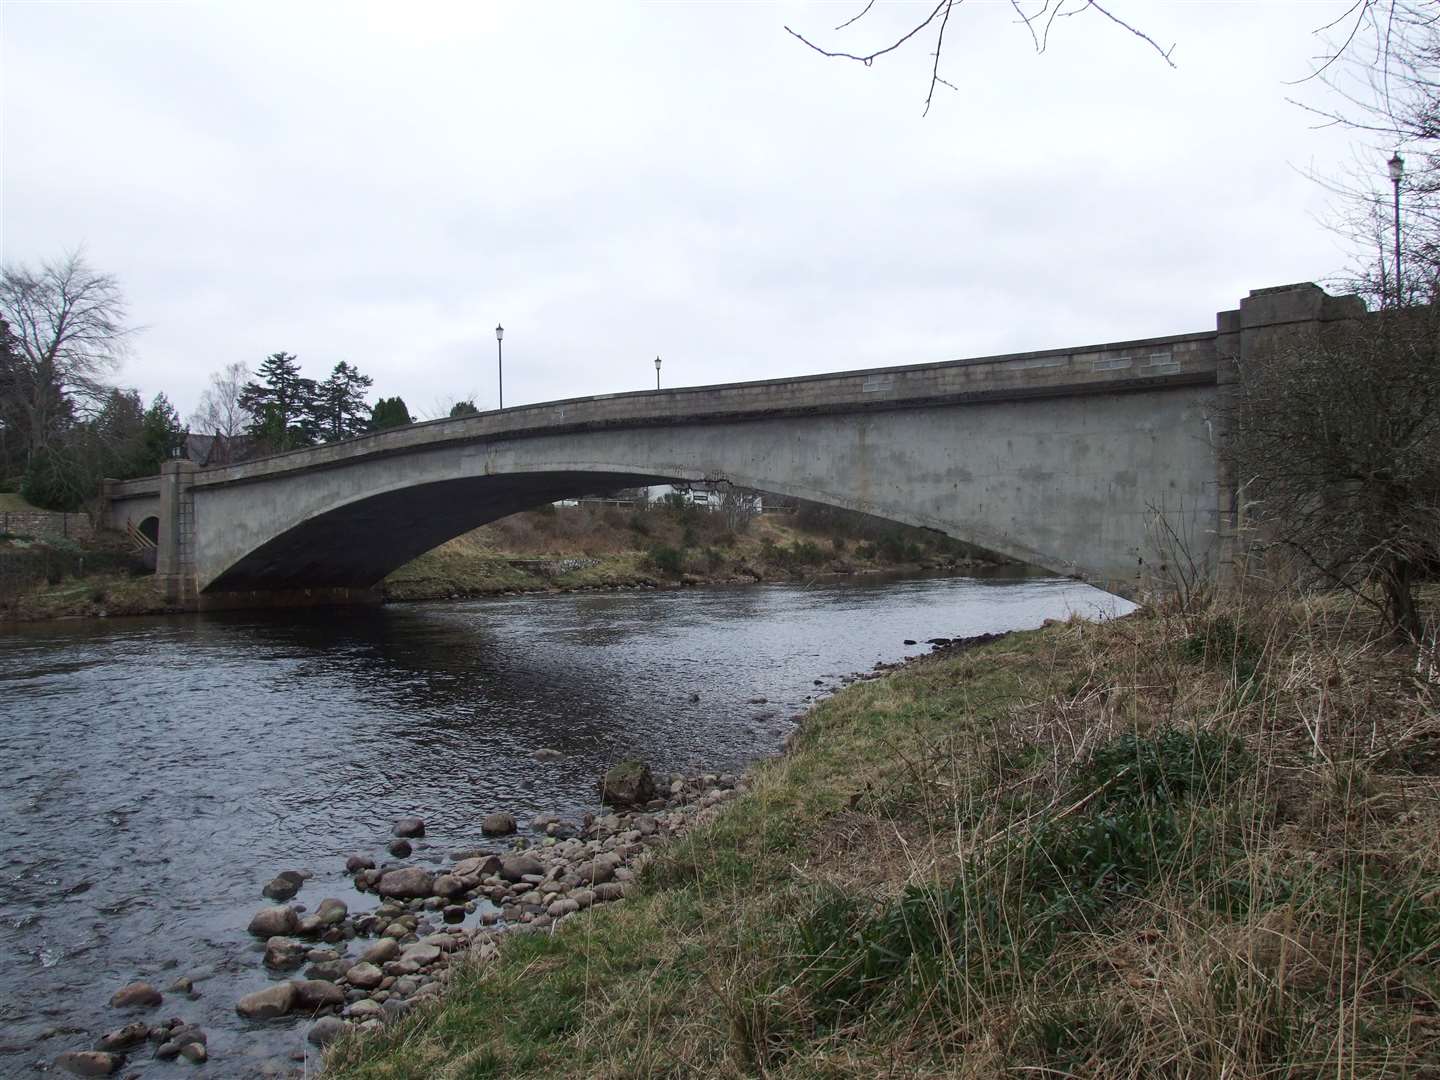 Investigation work at Aboyne Bridge has been carried out as a solution is sought for its long term future.